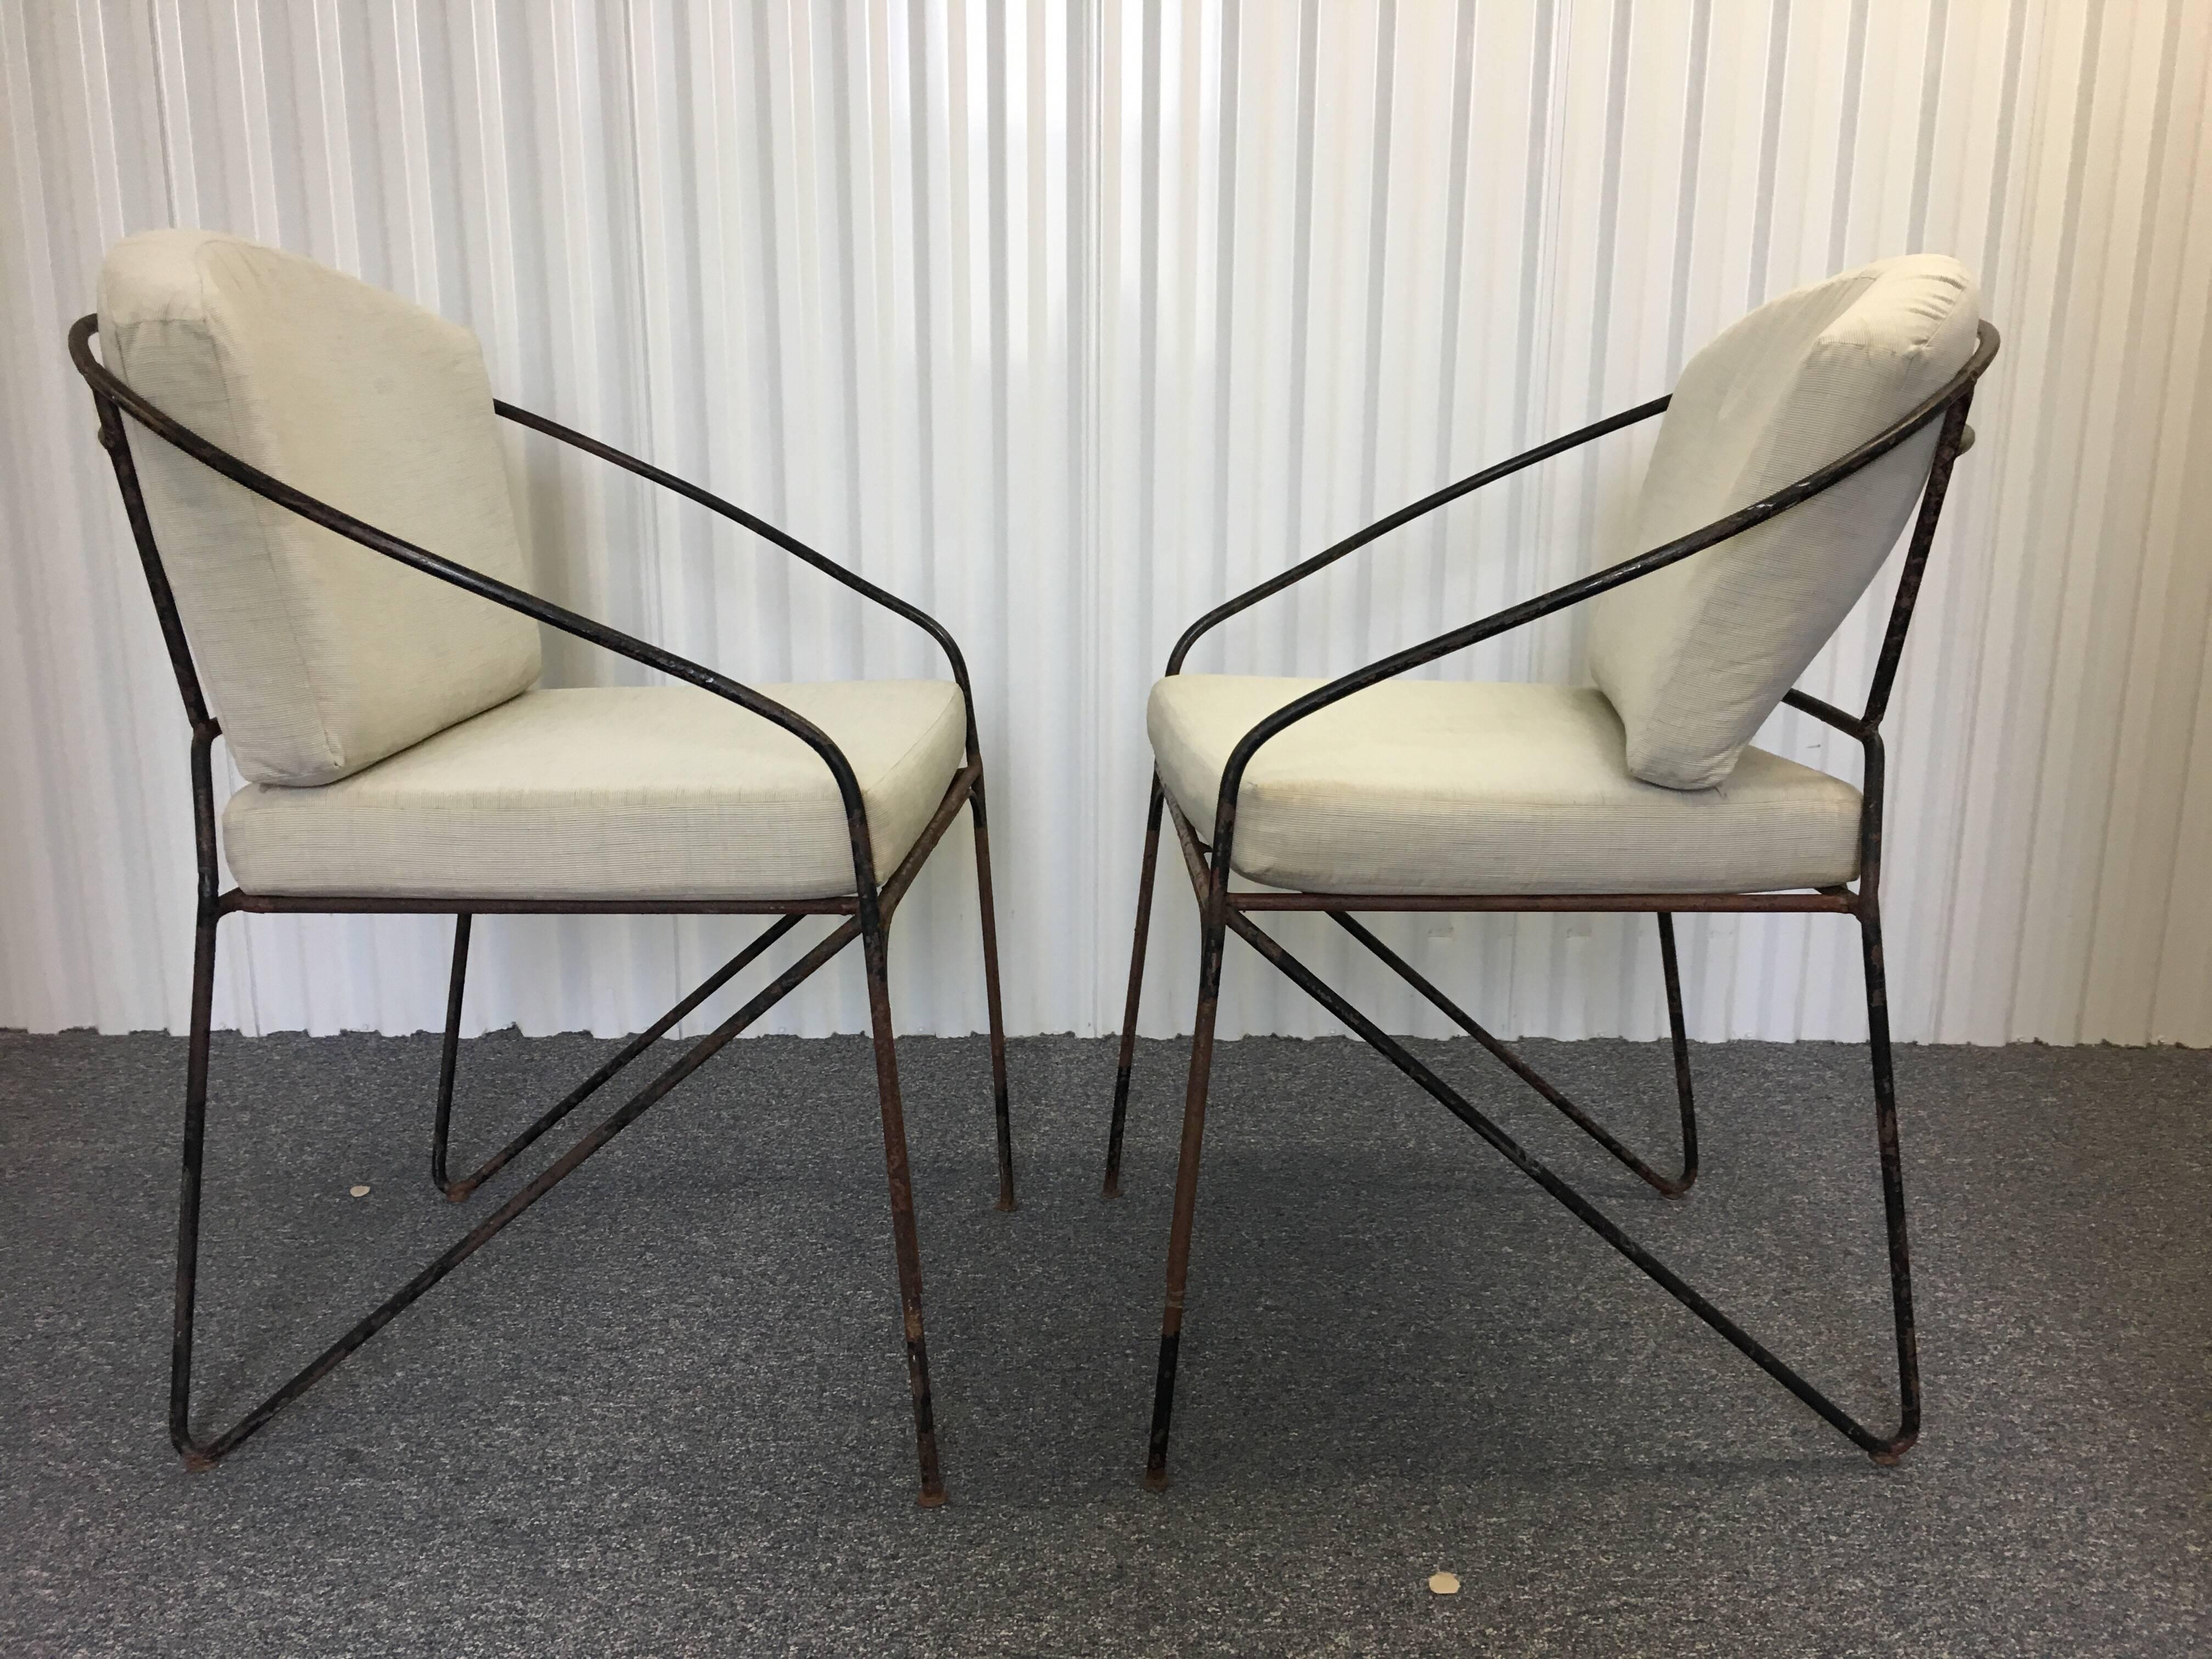 Pair of 19th c. French Iron Armchairs with a lovely rounded back.  Custom made cushions for rounded back.  Rusted black iron patination on surface of chairs. Cushion fabric needs refreshing but could be used as is as well. These are quite a